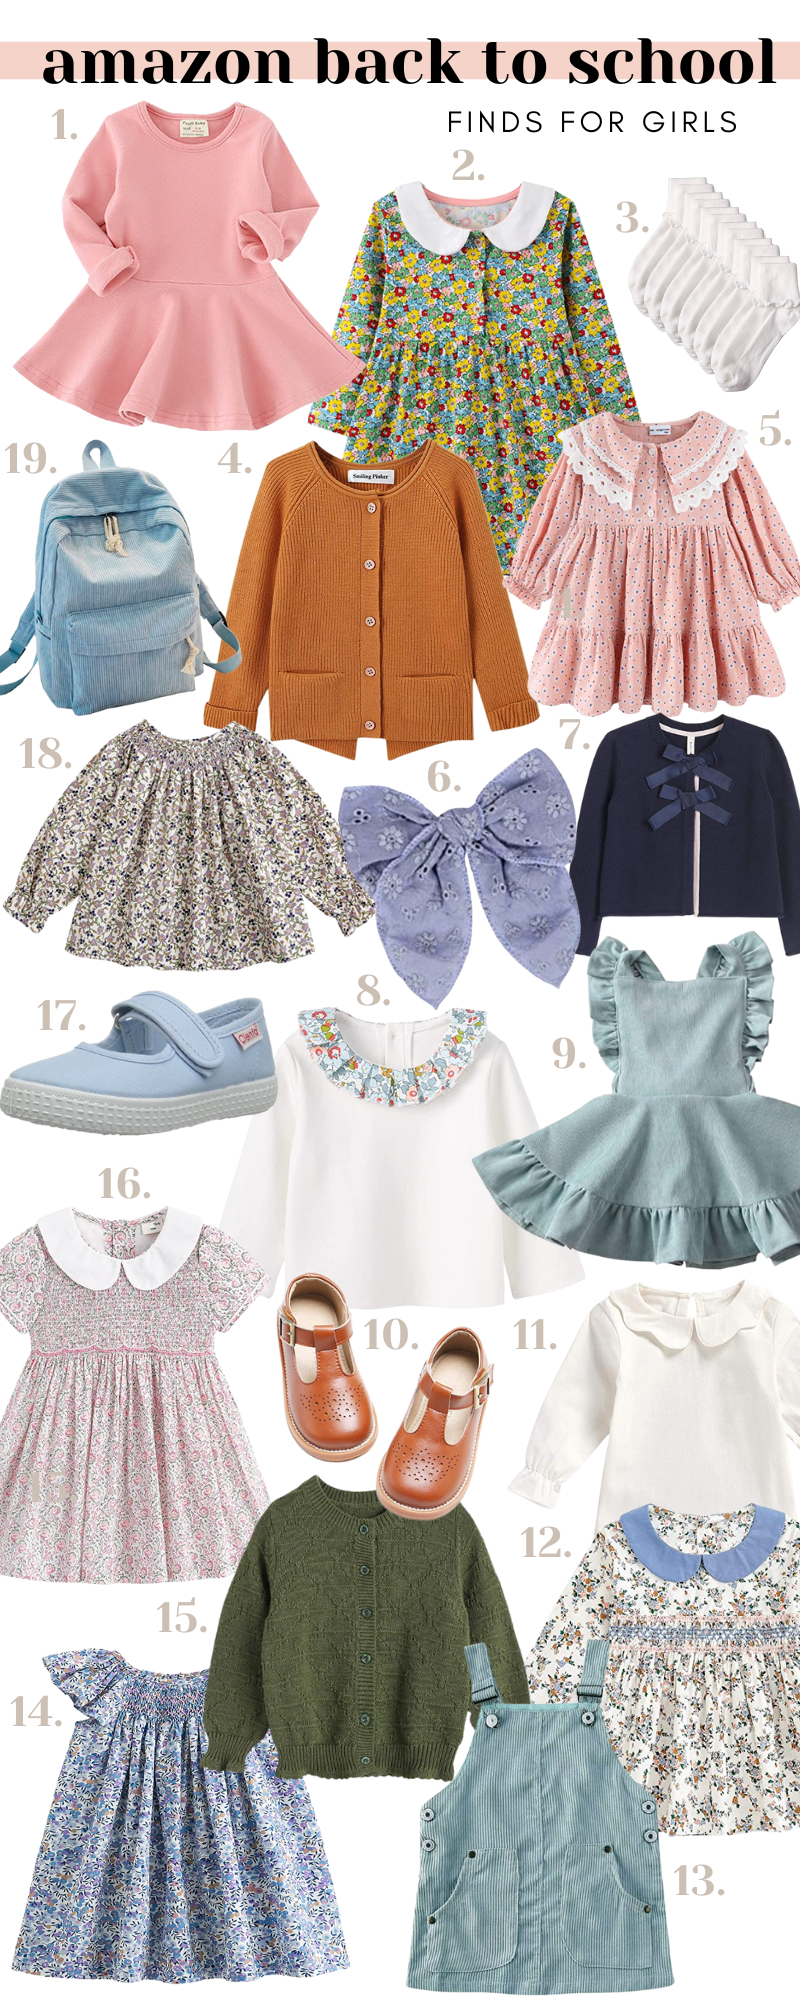 Back-to-School Outfits for Girls